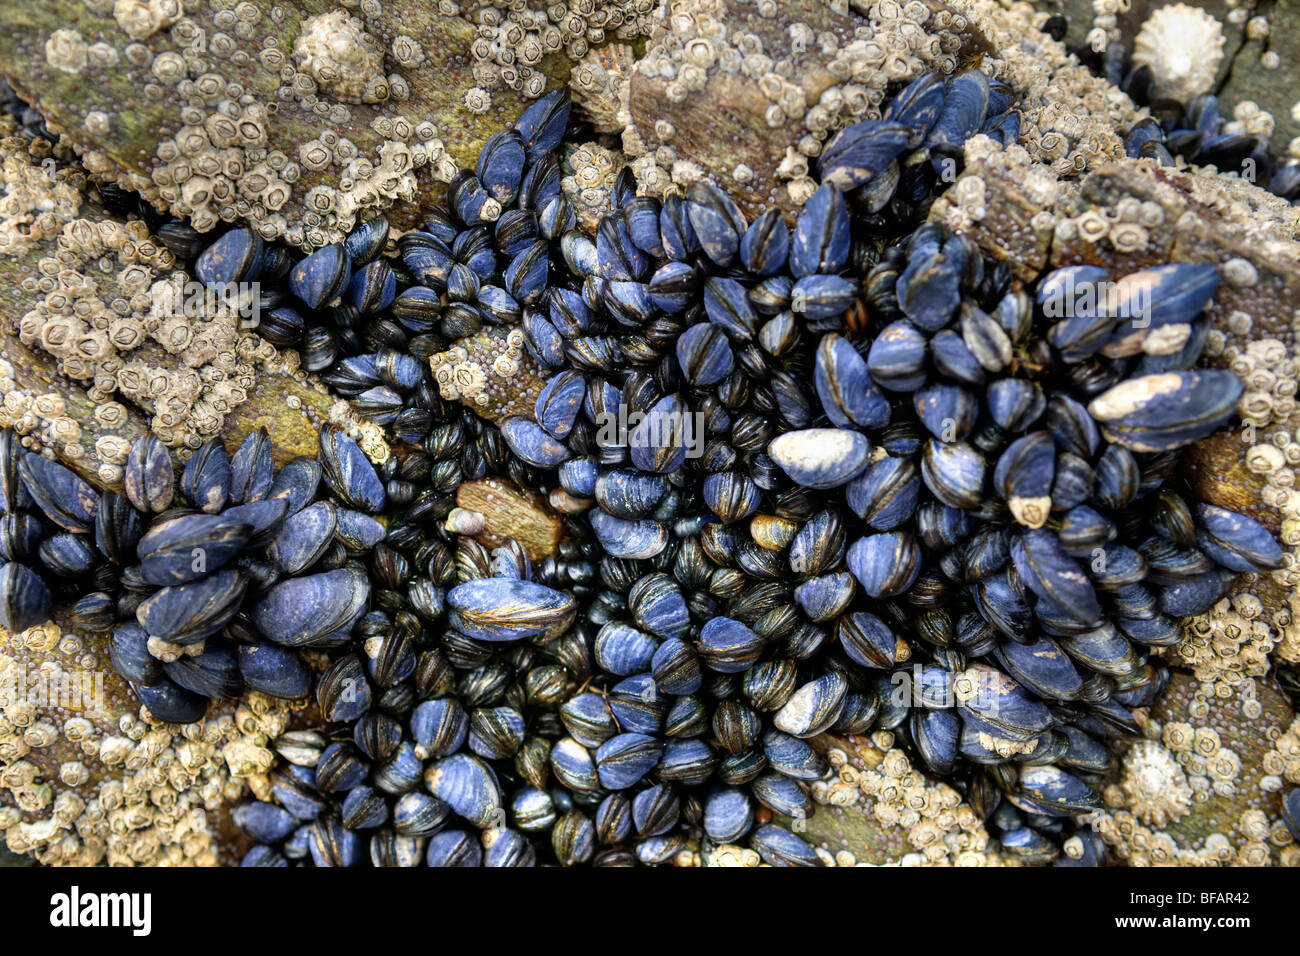 Blue Mussels, barnacles and limpets exposed on rock on beach at Balnakeil bay, Durness, Scotland Stock Photo